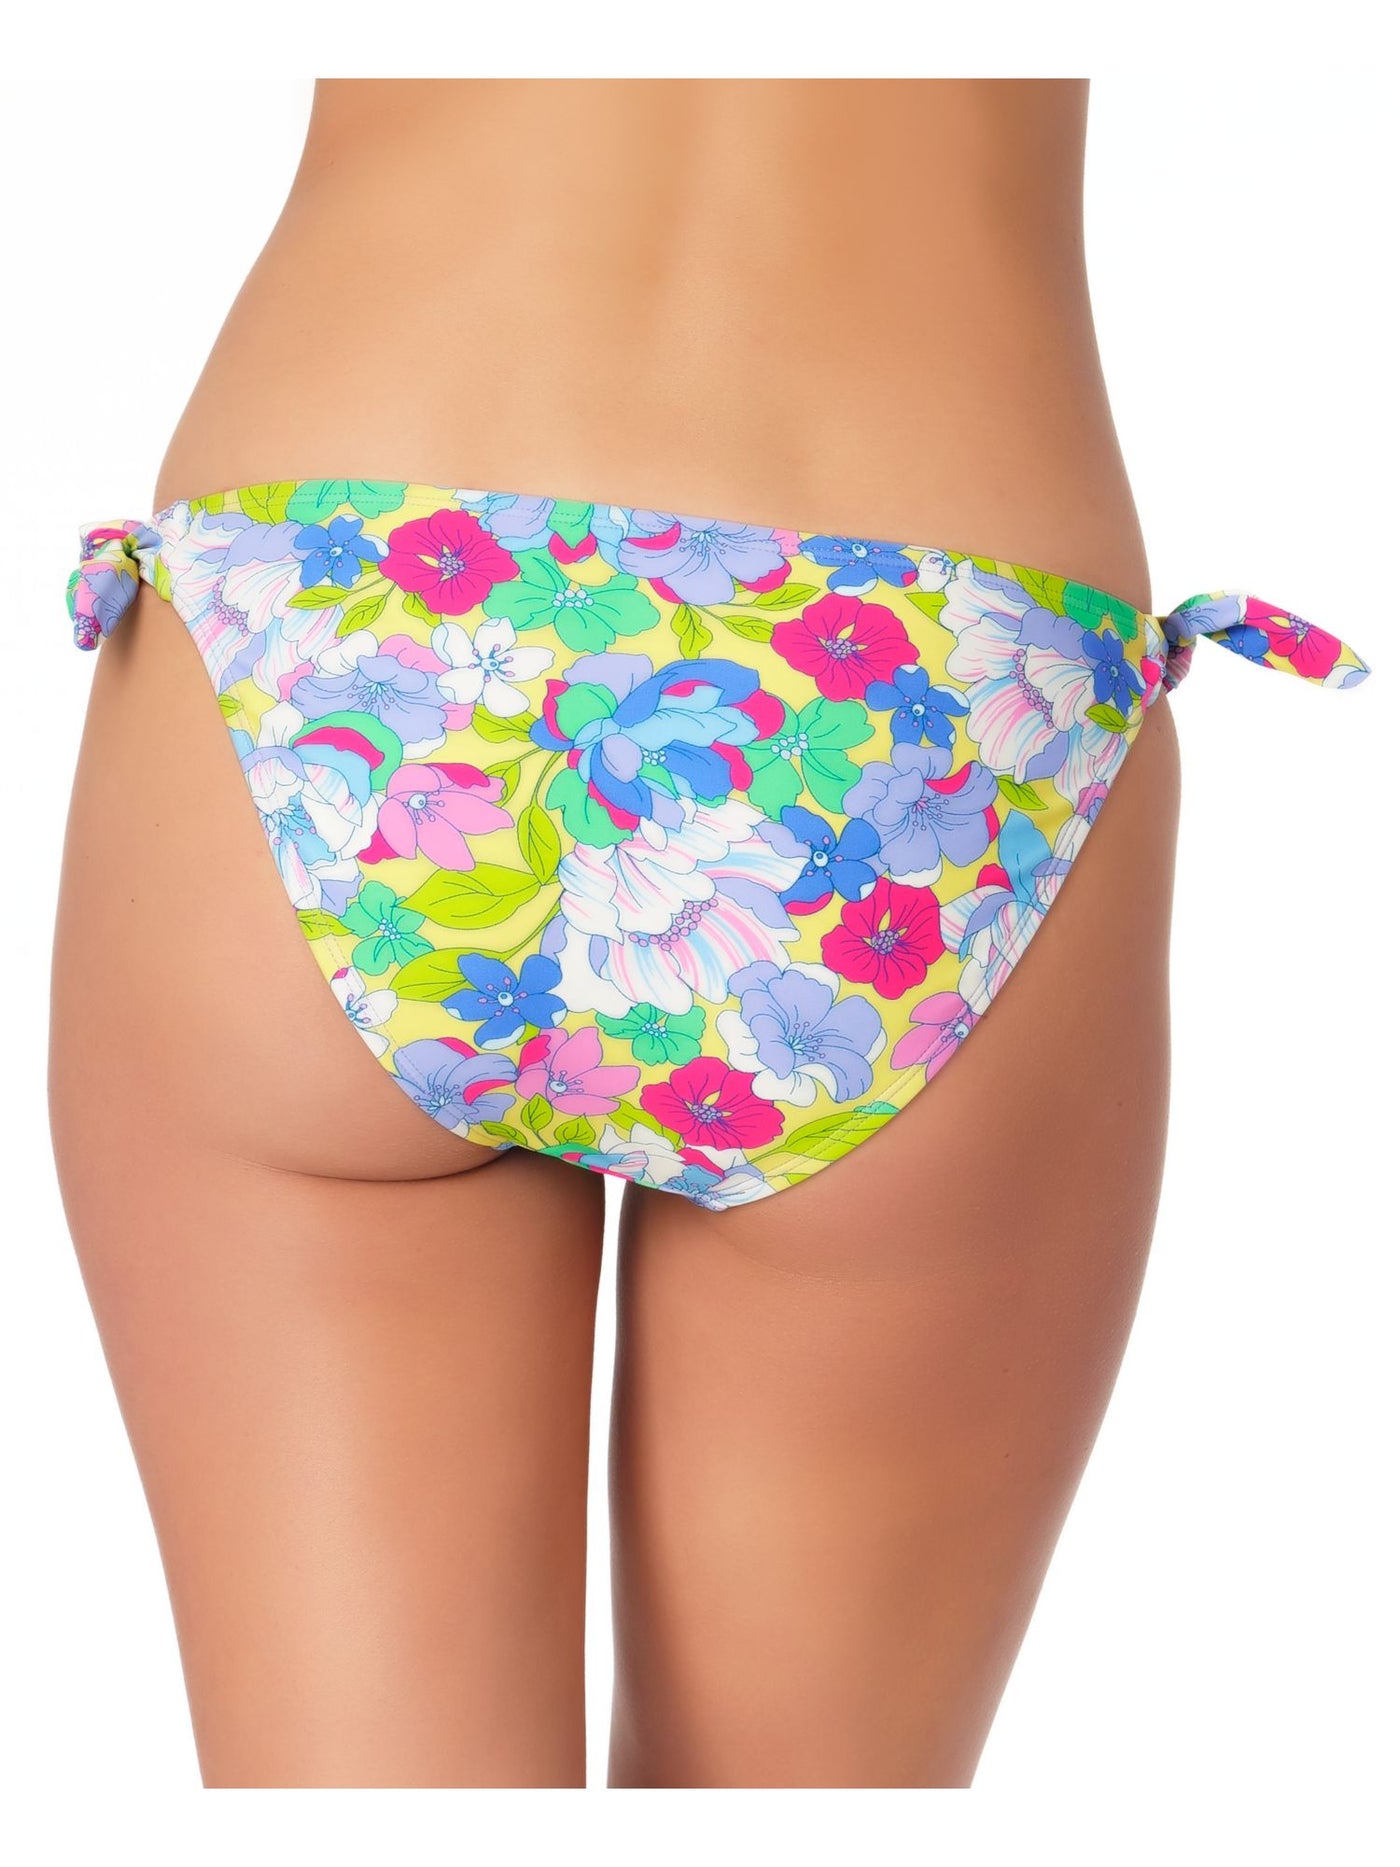 CALIFORNIA WAVES Women's Multi Color Floral Stretch LINED Moderate Coverage Tie Hipster Swimsuit Bottom XL